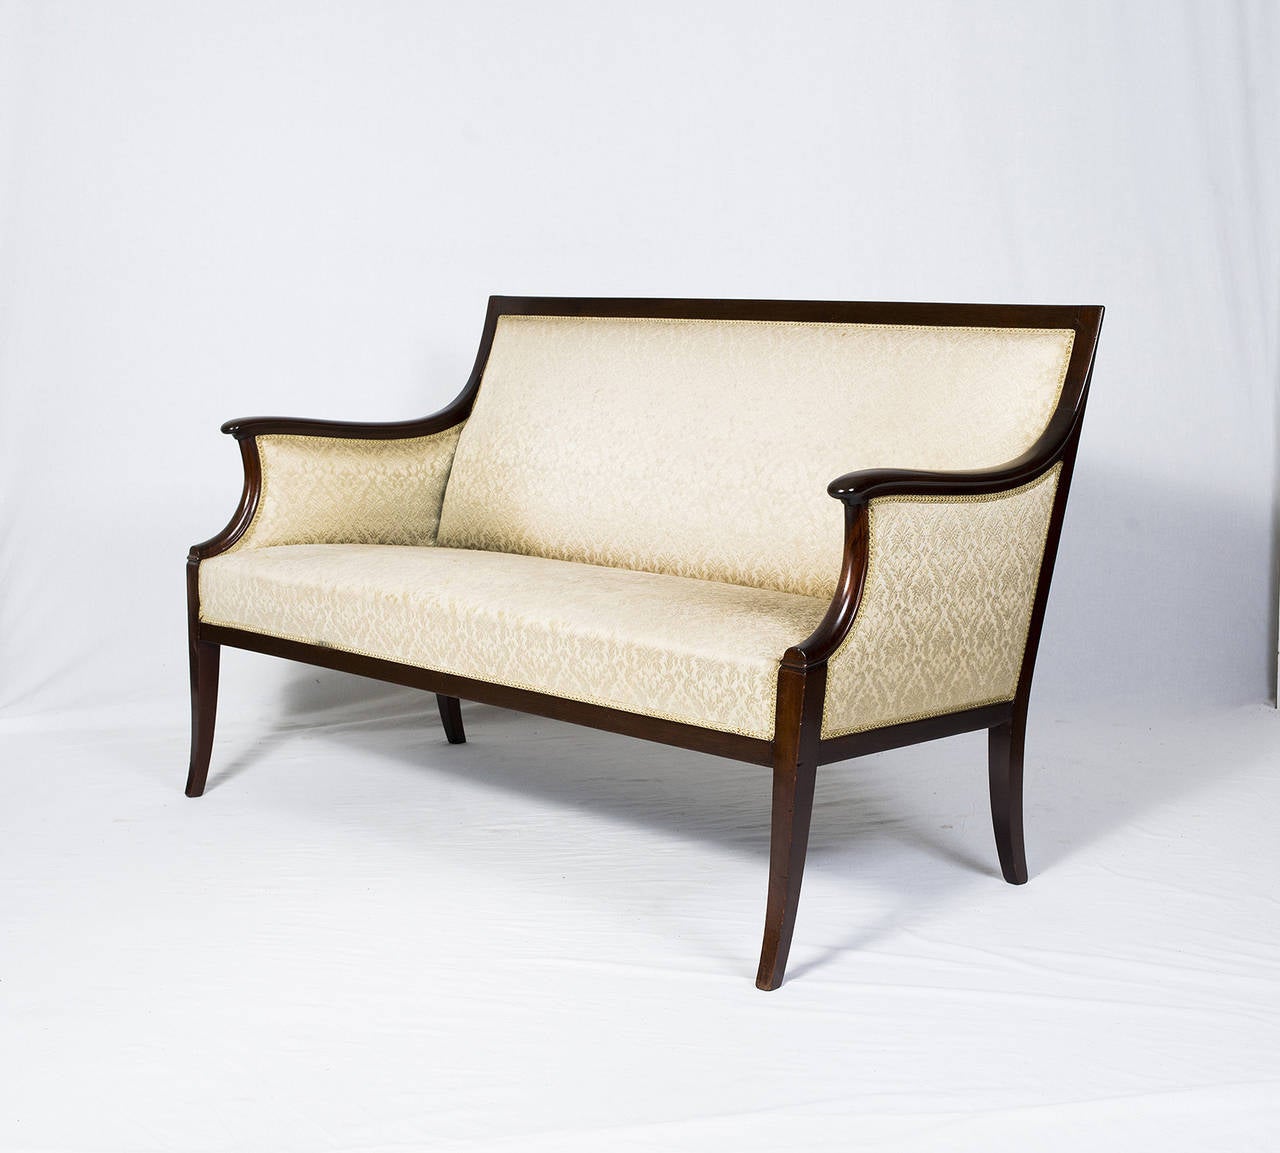 Frits Henningsen settee.  Store formerly known as ARTFUL DODGER INC